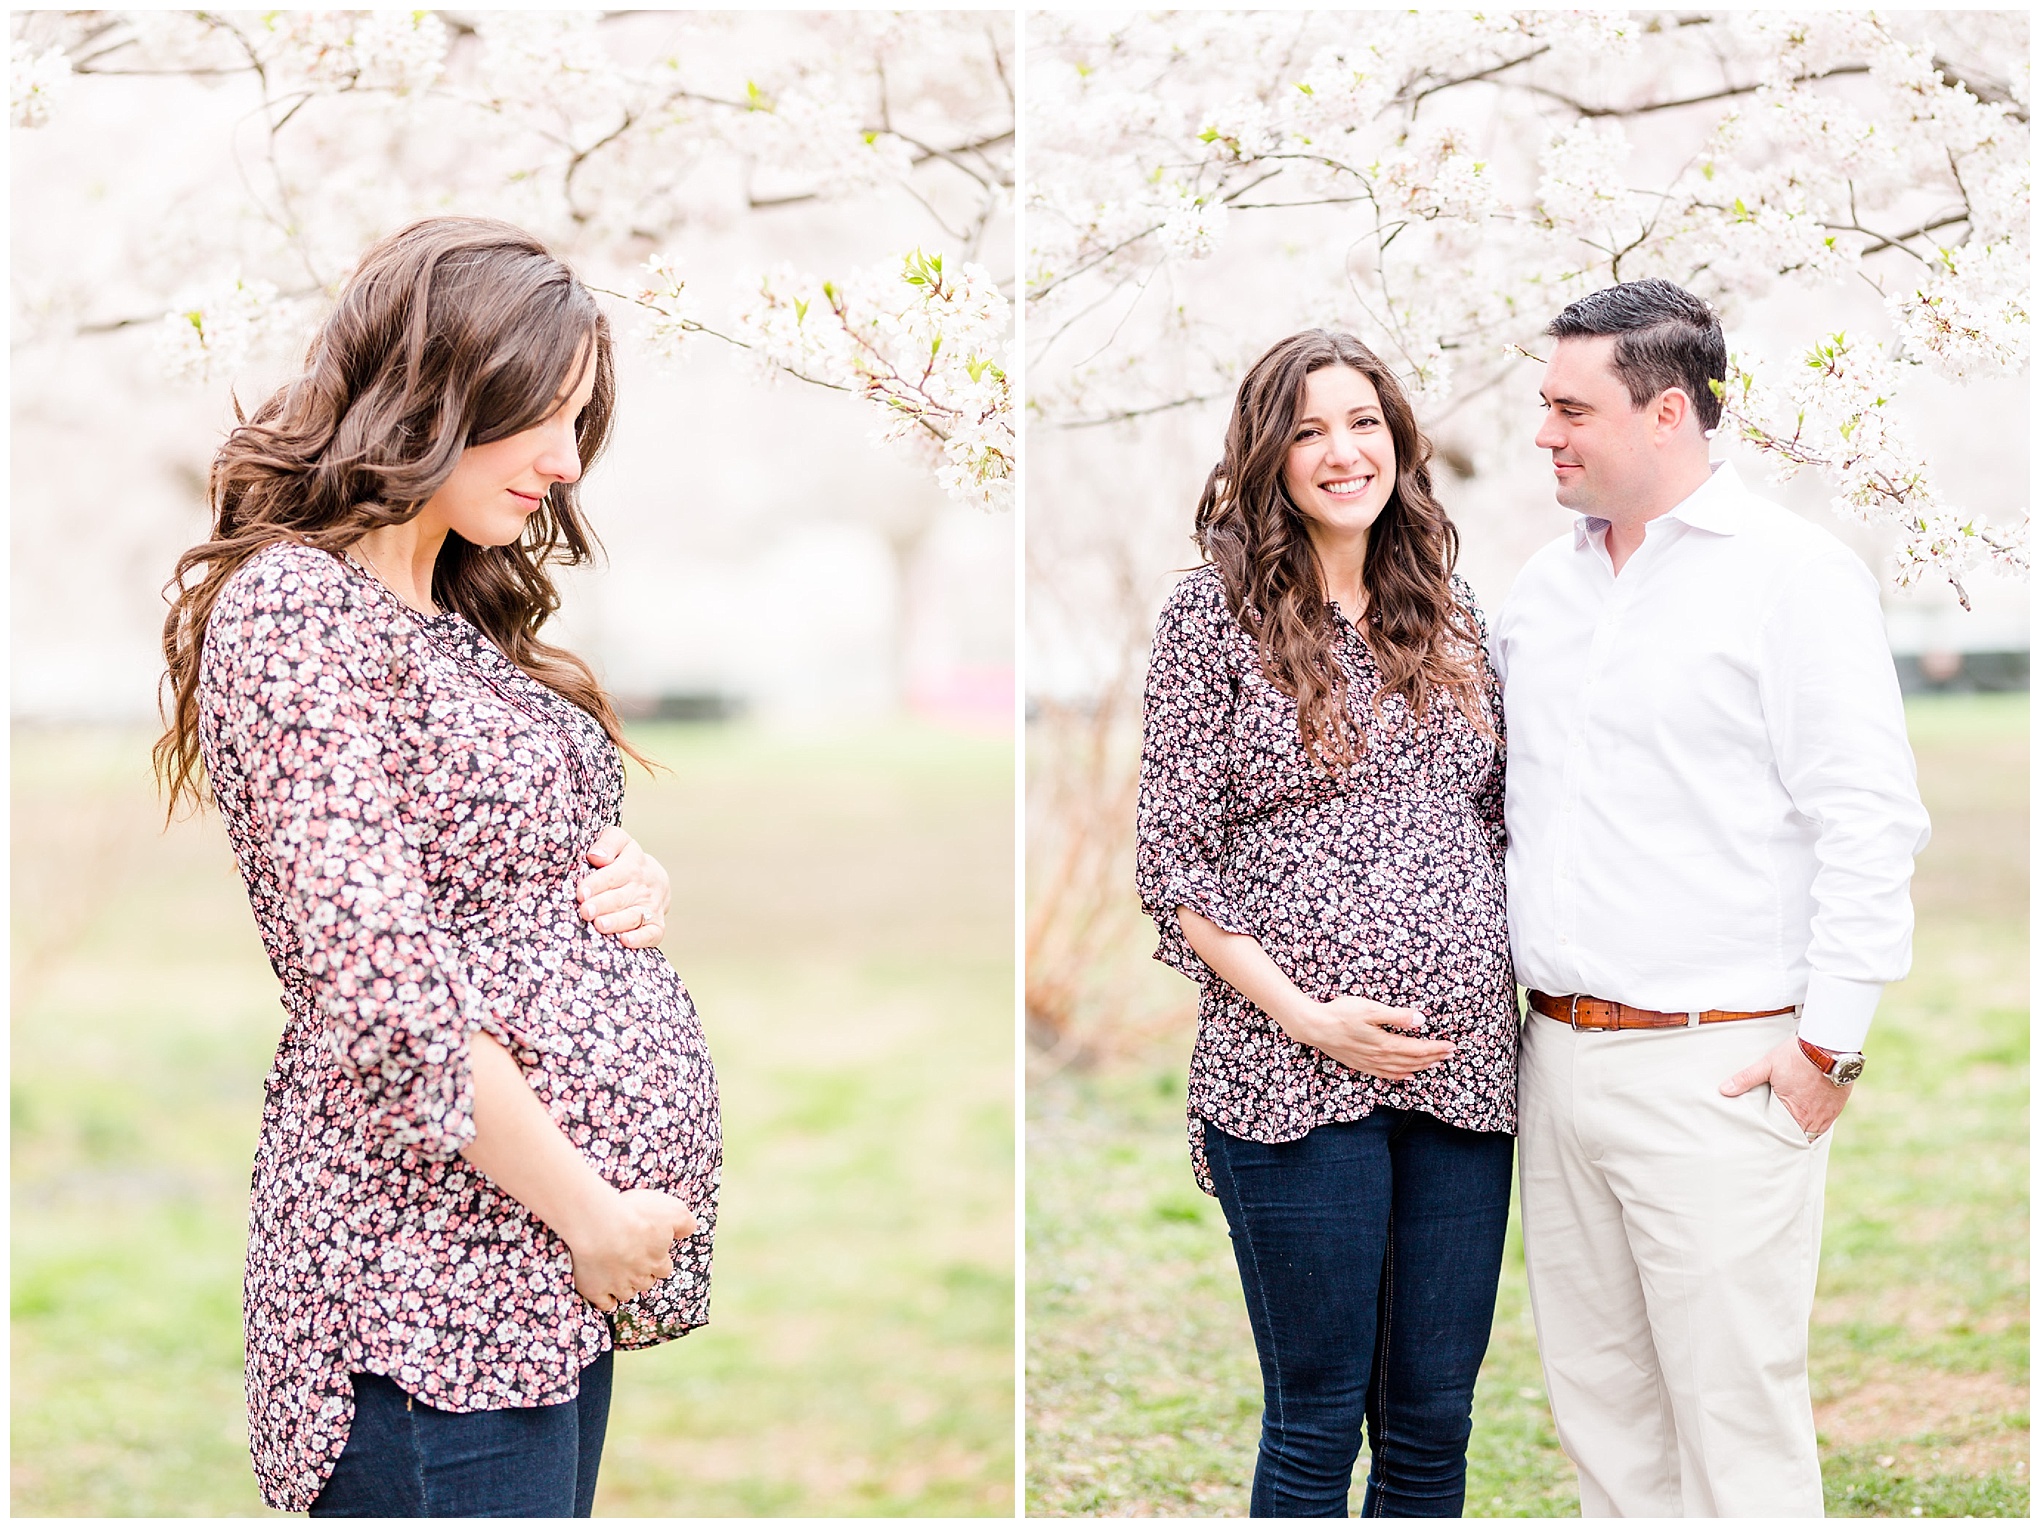 D.C. cherry blossoms maternity session, maternity portraits, maternity photos, D.C. cherry blossoms, cherry blossoms maternity photo, floral print top, brunette expectant mom, expecting mother, brunette woman, pregnant woman, third trimester, baby bump, cherry blossoms forest, couple hugging